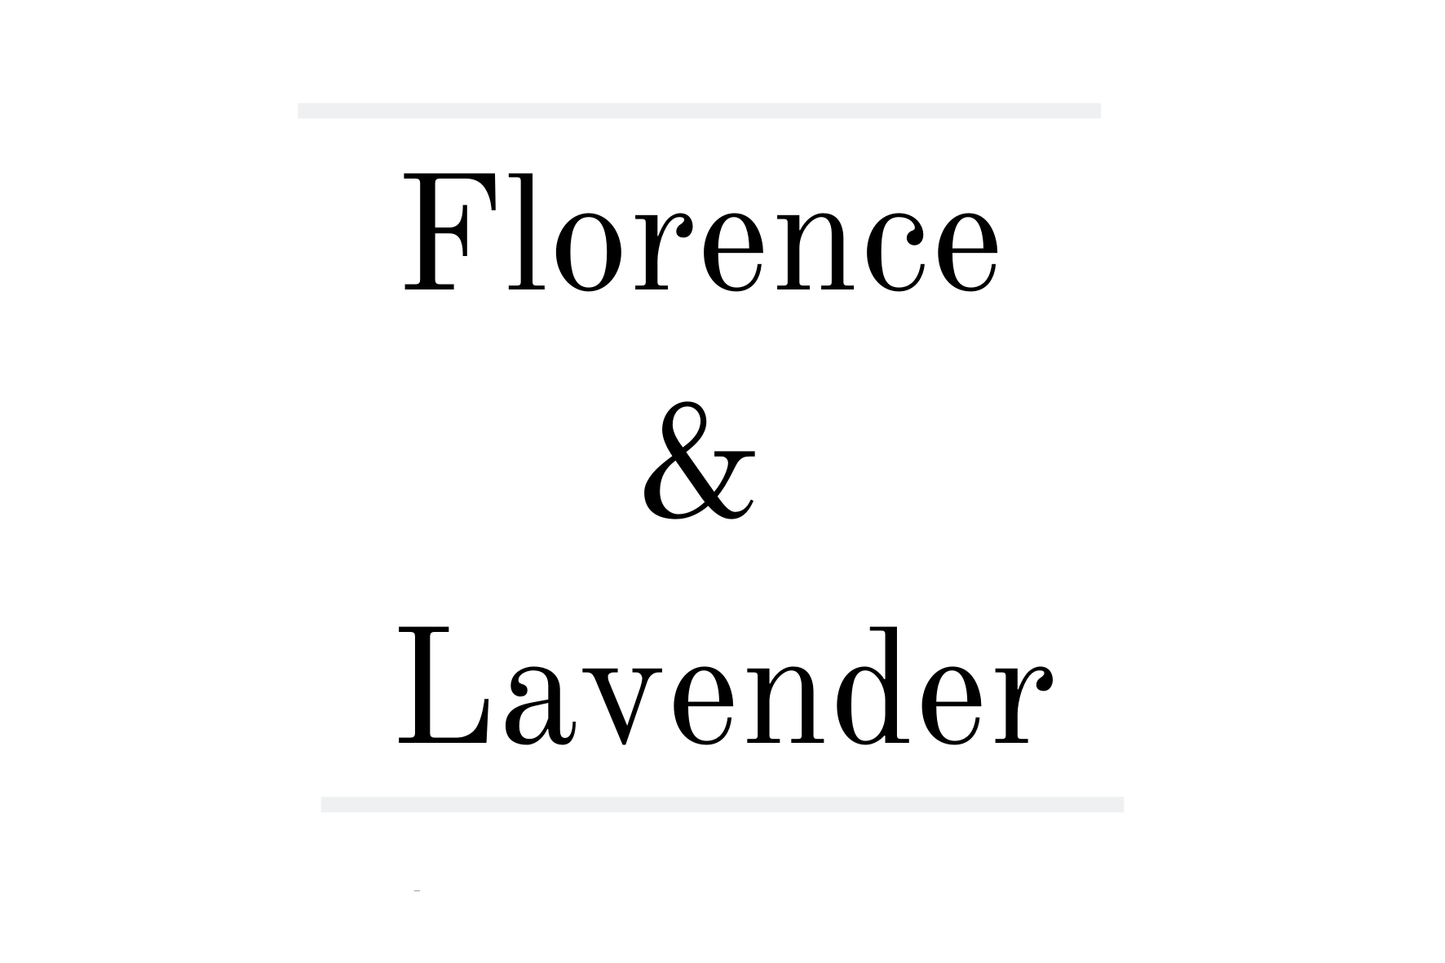 Invoice for D.Goodwin - Florence & Lavender